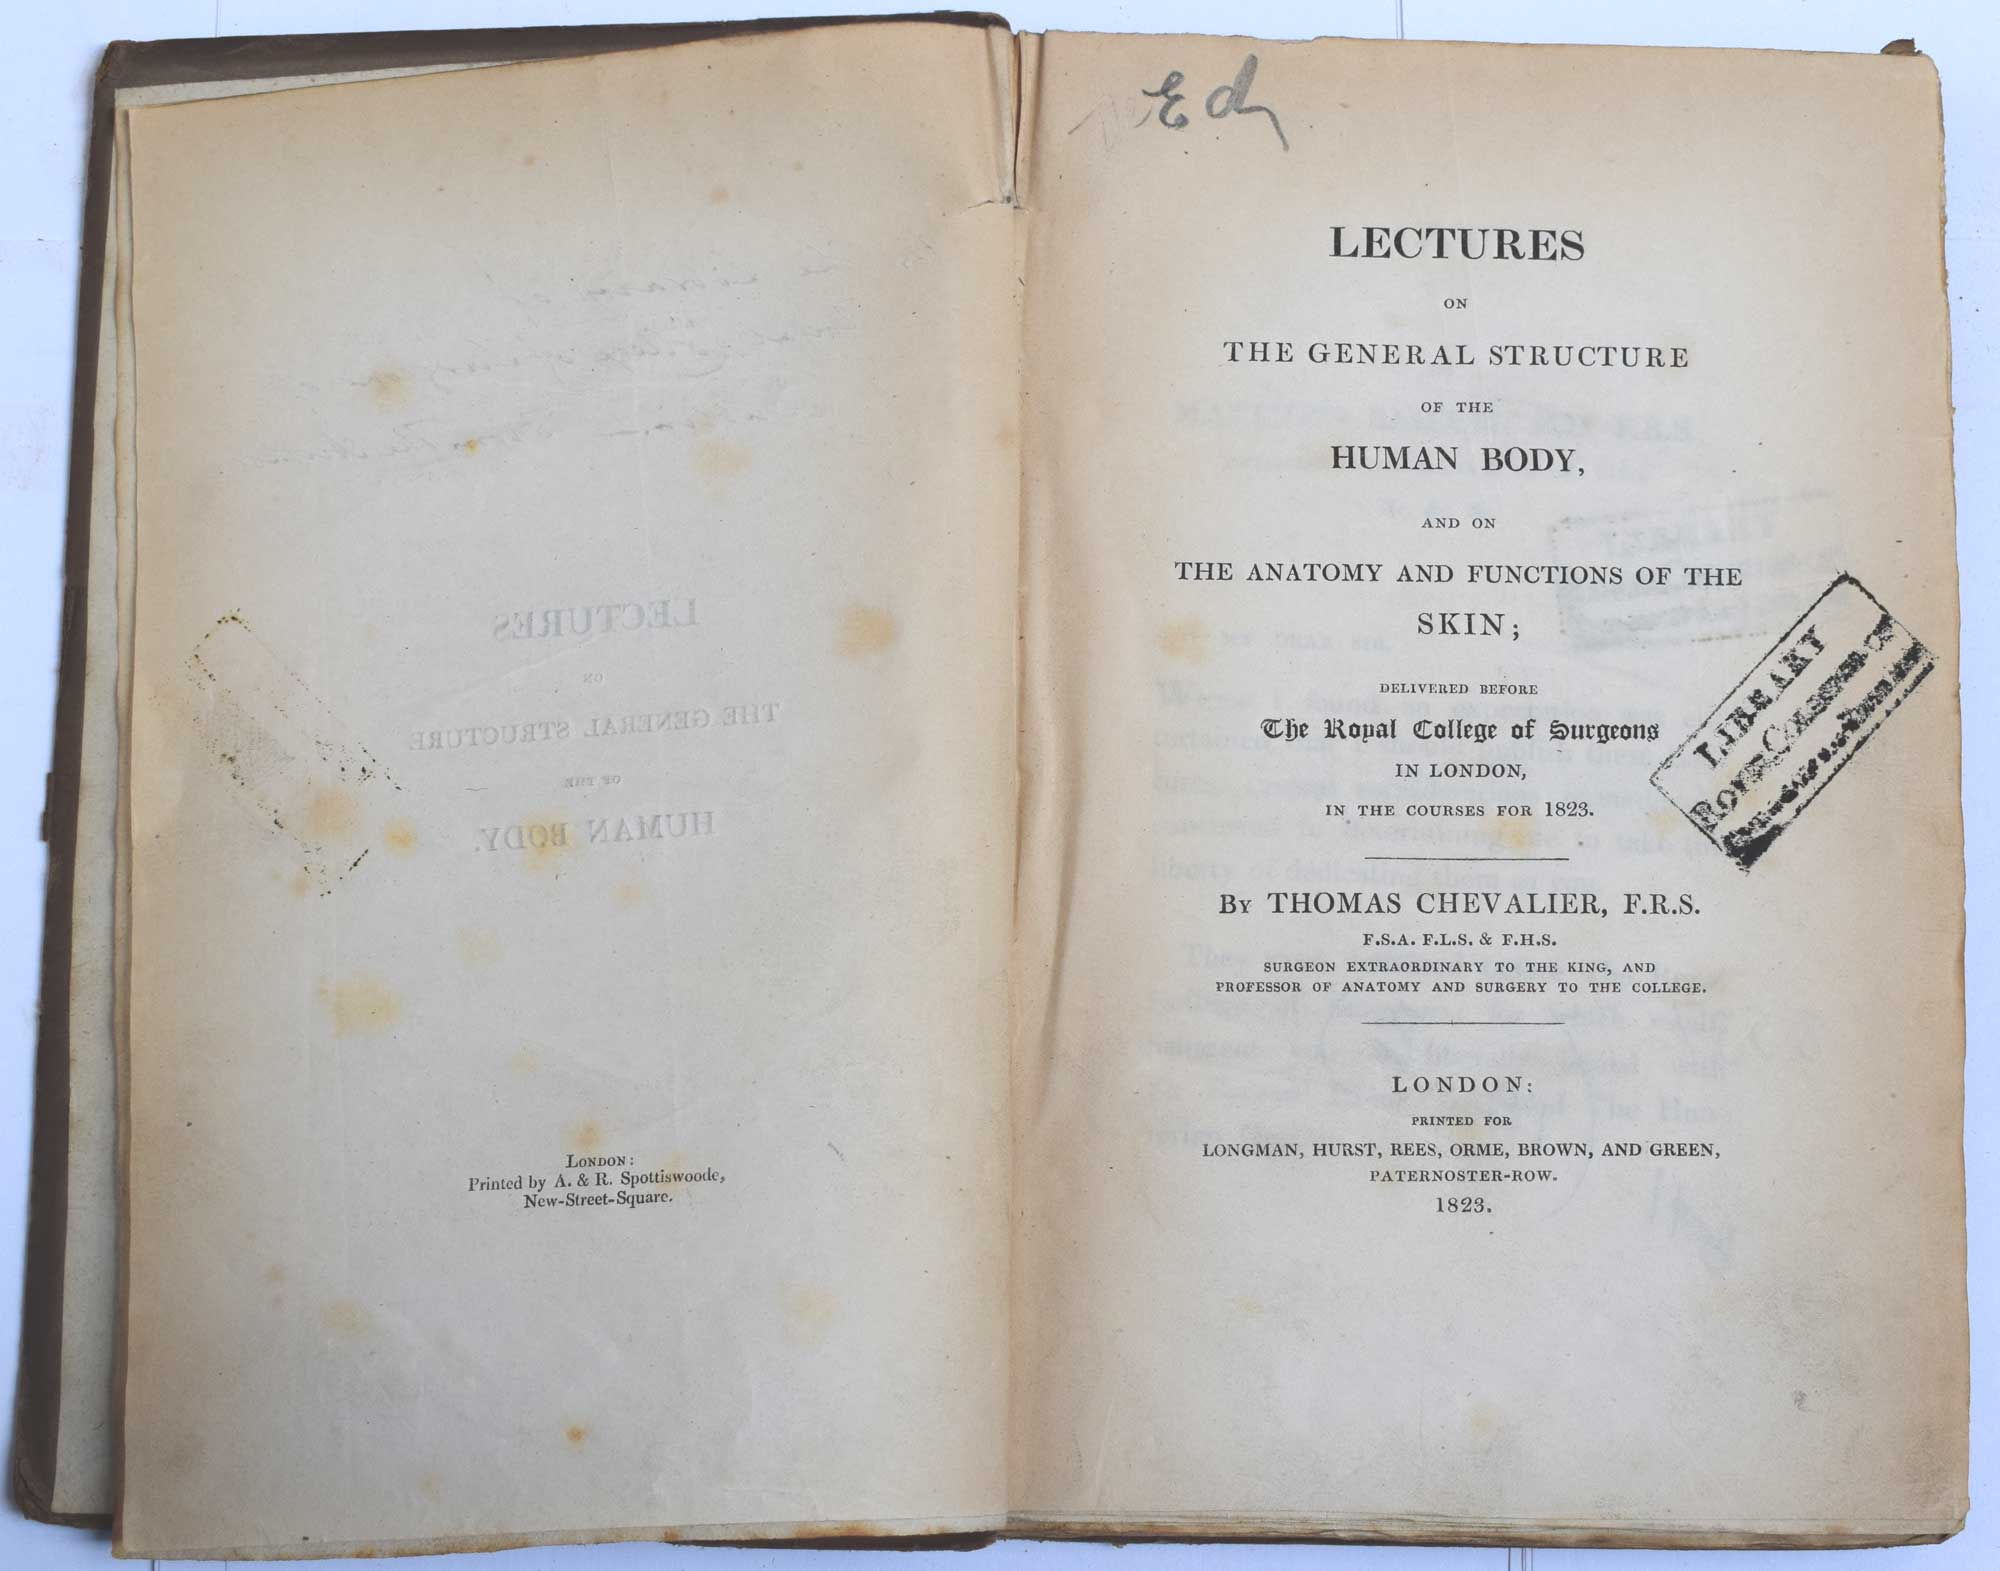 Lectures on the General Structure of the Human Body, and on the Anatomy and Functions of the Skin; Delivered Before the Royal College of Surgeons in London, in the Courses for 1823. Author's inscription.